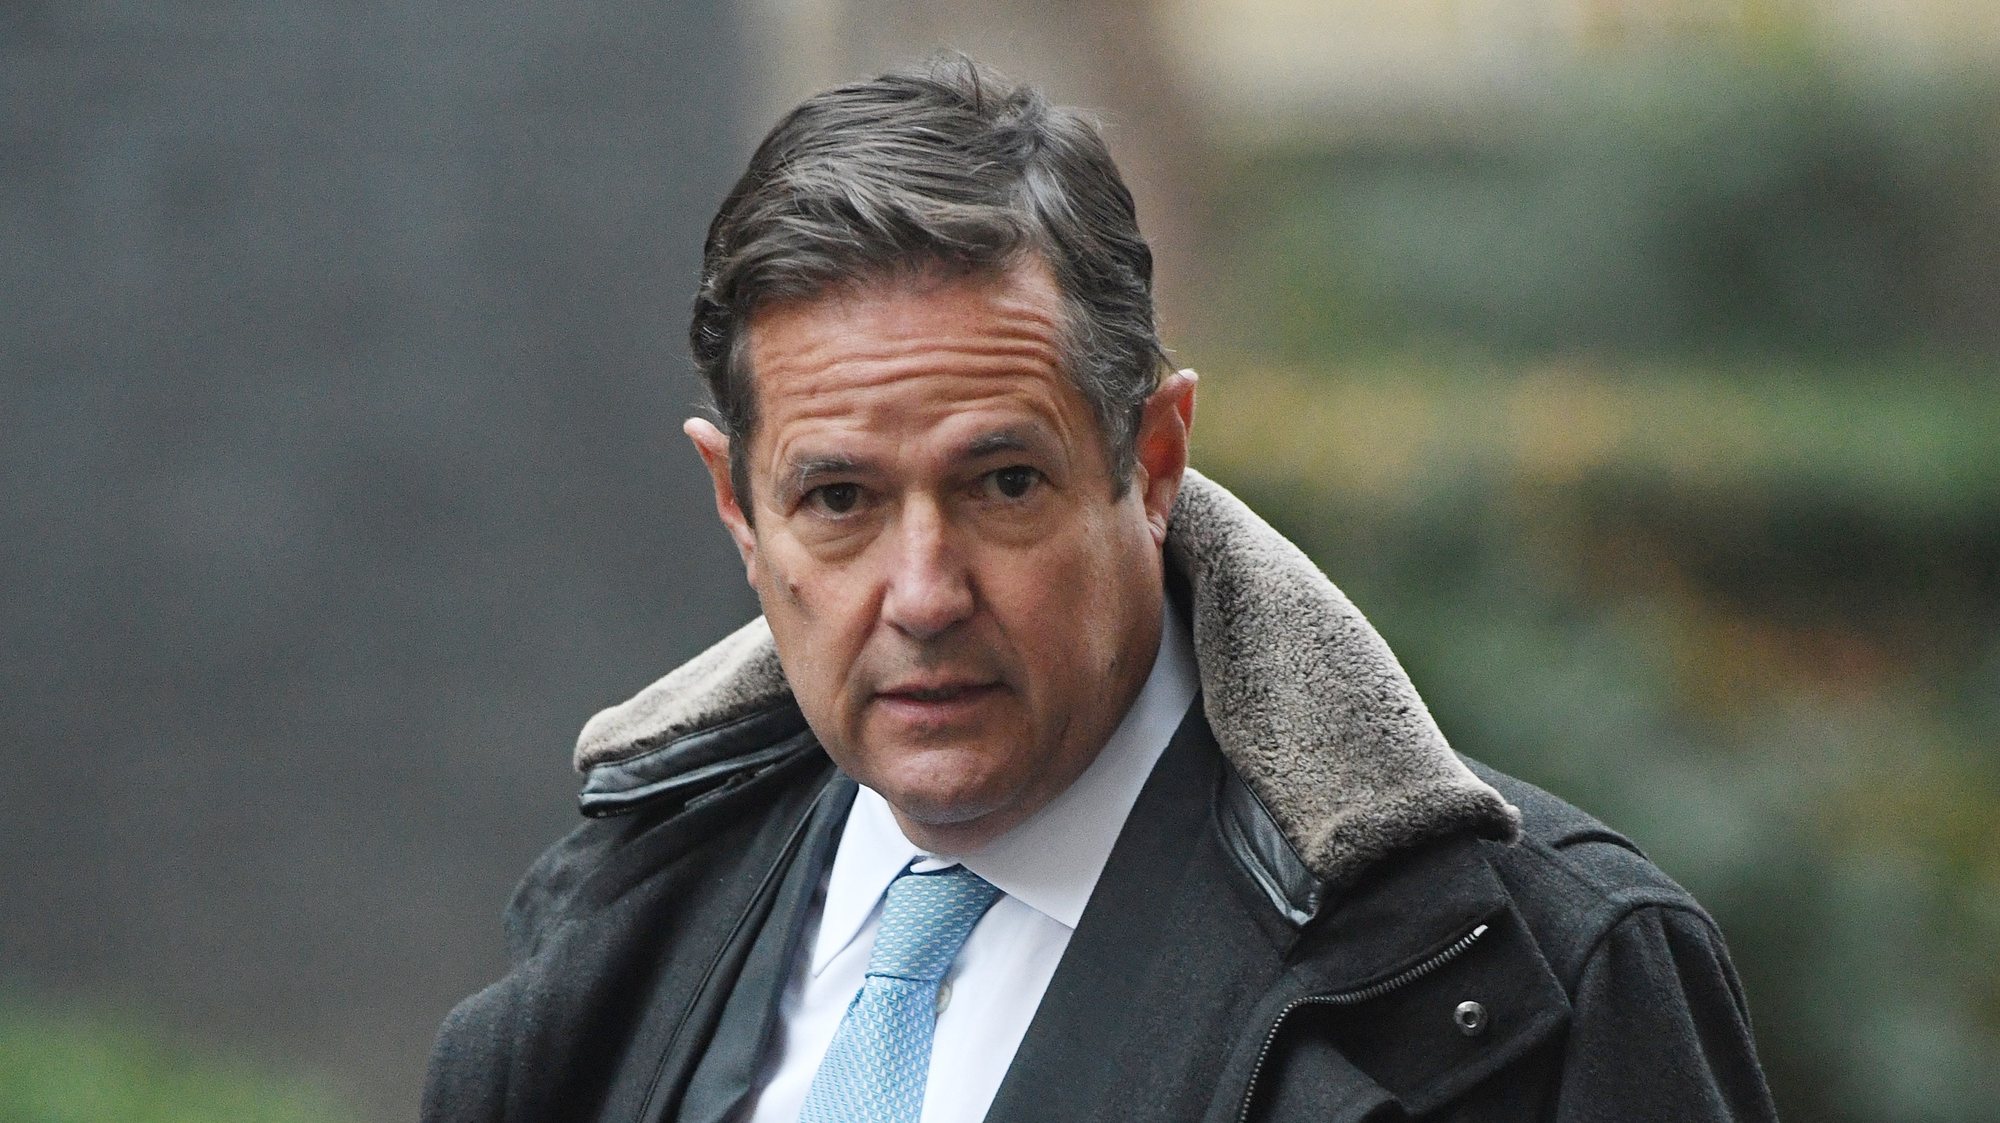 epa06727648 (FILE) - Chief Executive of Barclays Group (Barclays) Jes Staley arrives for a meeting of financial services leaders with the British Prime Minister, Theresa May at 10 Downing Street, central  London, Britain, 11 January 2018, (reissued 11 May 2018). Media reports on 11 May 2018 that Jes Staley has been fined 642,430 GBP or 730,145 euros by regulators The Financial Conduct Authority (FCA) and the Prudential Regulation Authority (PRA) stating that Mr Staley failed to act with due skill, care and diligence in the way he acted in response to an anonymous letter received by Barclays in June 2016. Barclays is also now subject to special requirements by which it must report annually to the regulators detailing how it handles whistleblowing, with personal attestations required from those Senior Managers responsible for the relevant systems and controls.  EPA/FACUNDO ARRIZABALAGA *** Local Caption *** 54002158